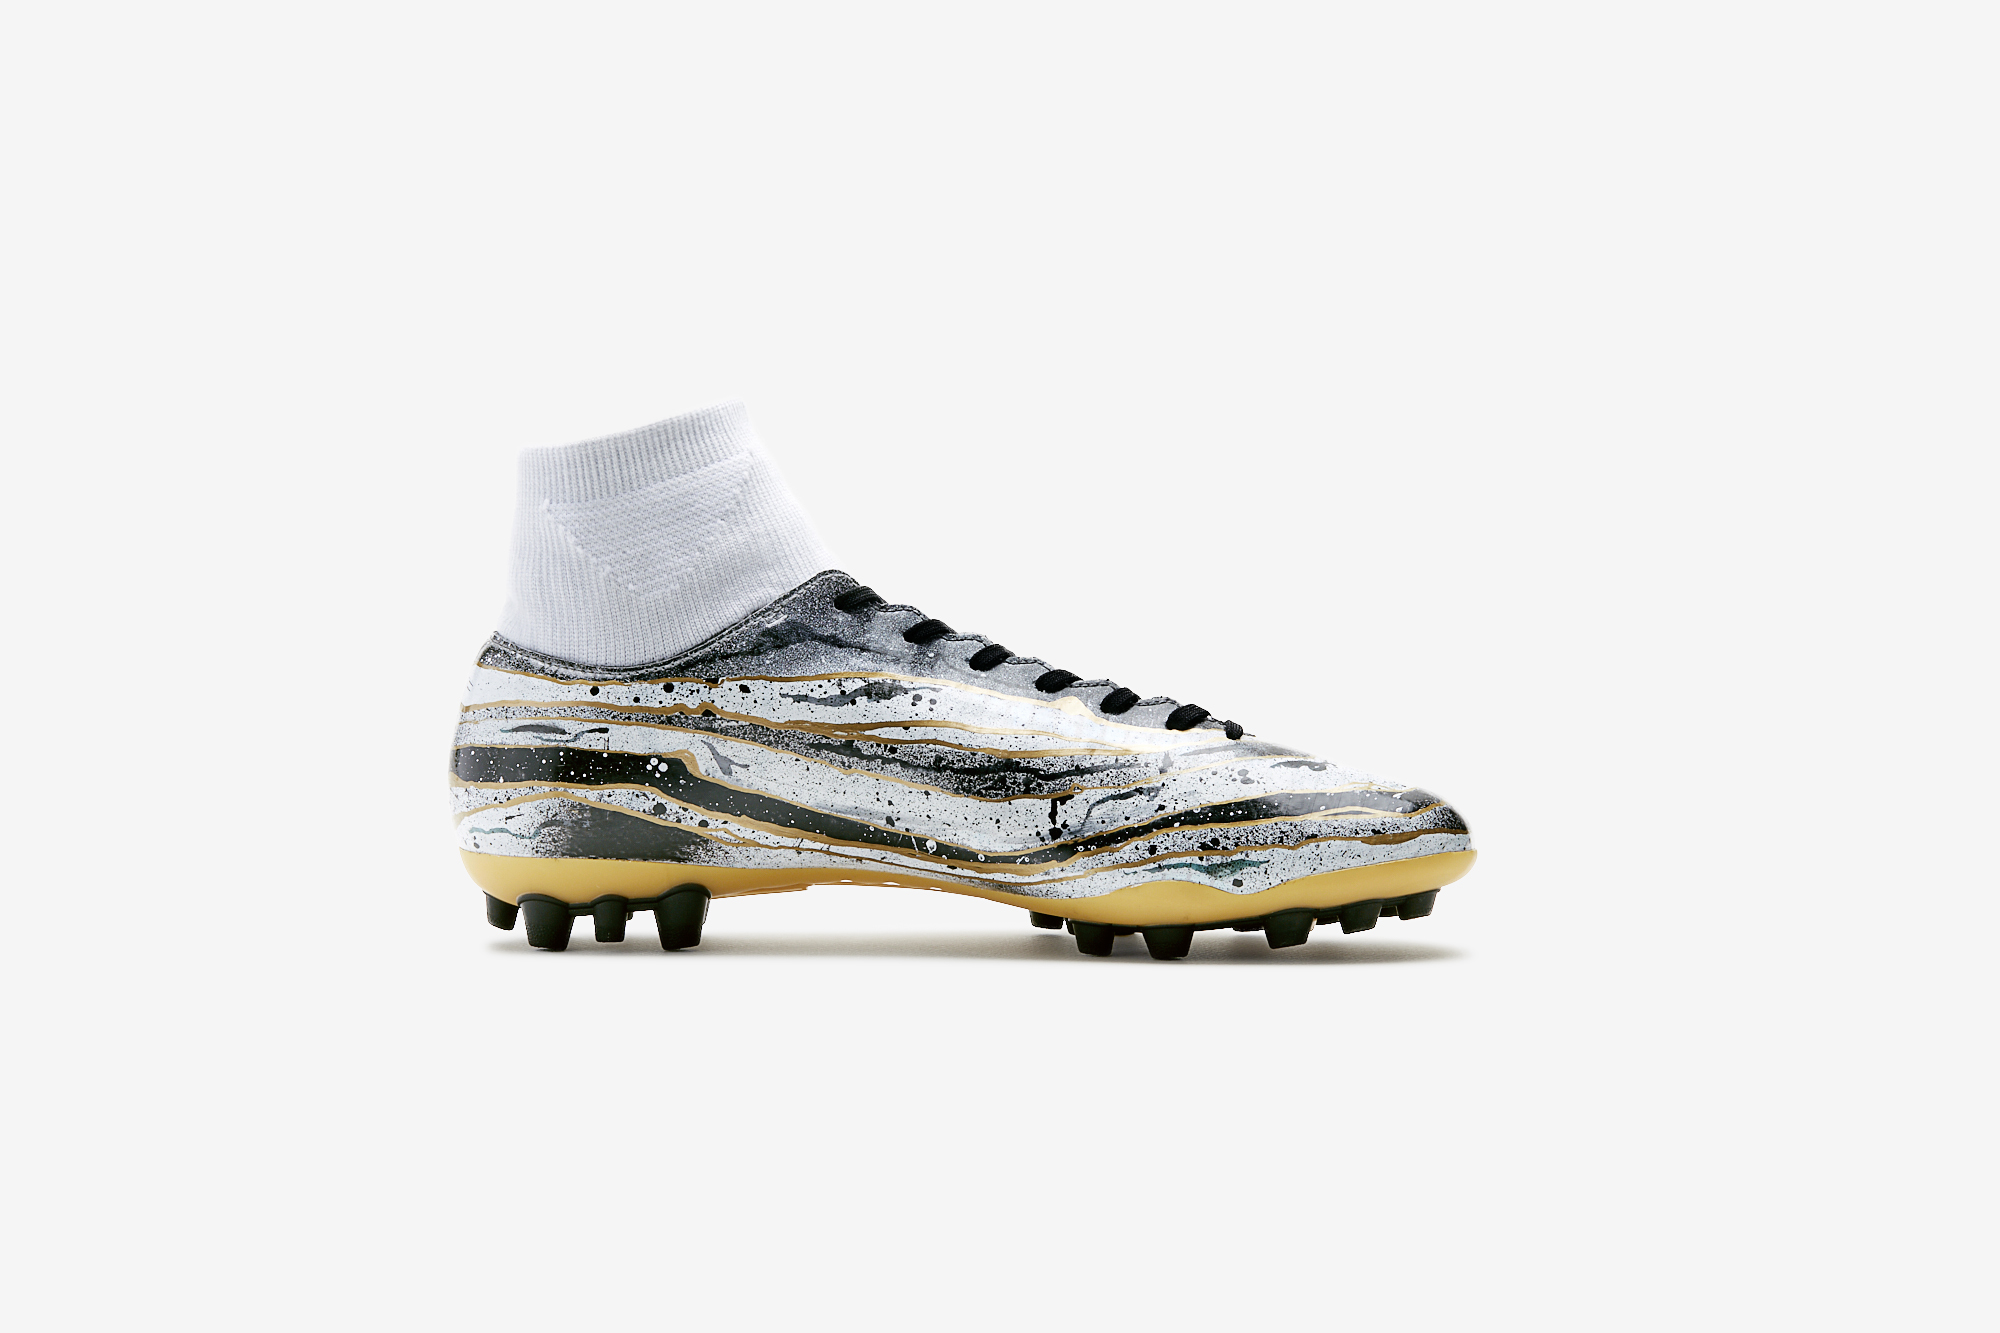 J1340_2017_7_22_NIKE_CR7_Cultural_Exhibition_Product_Shoot_001.jpg